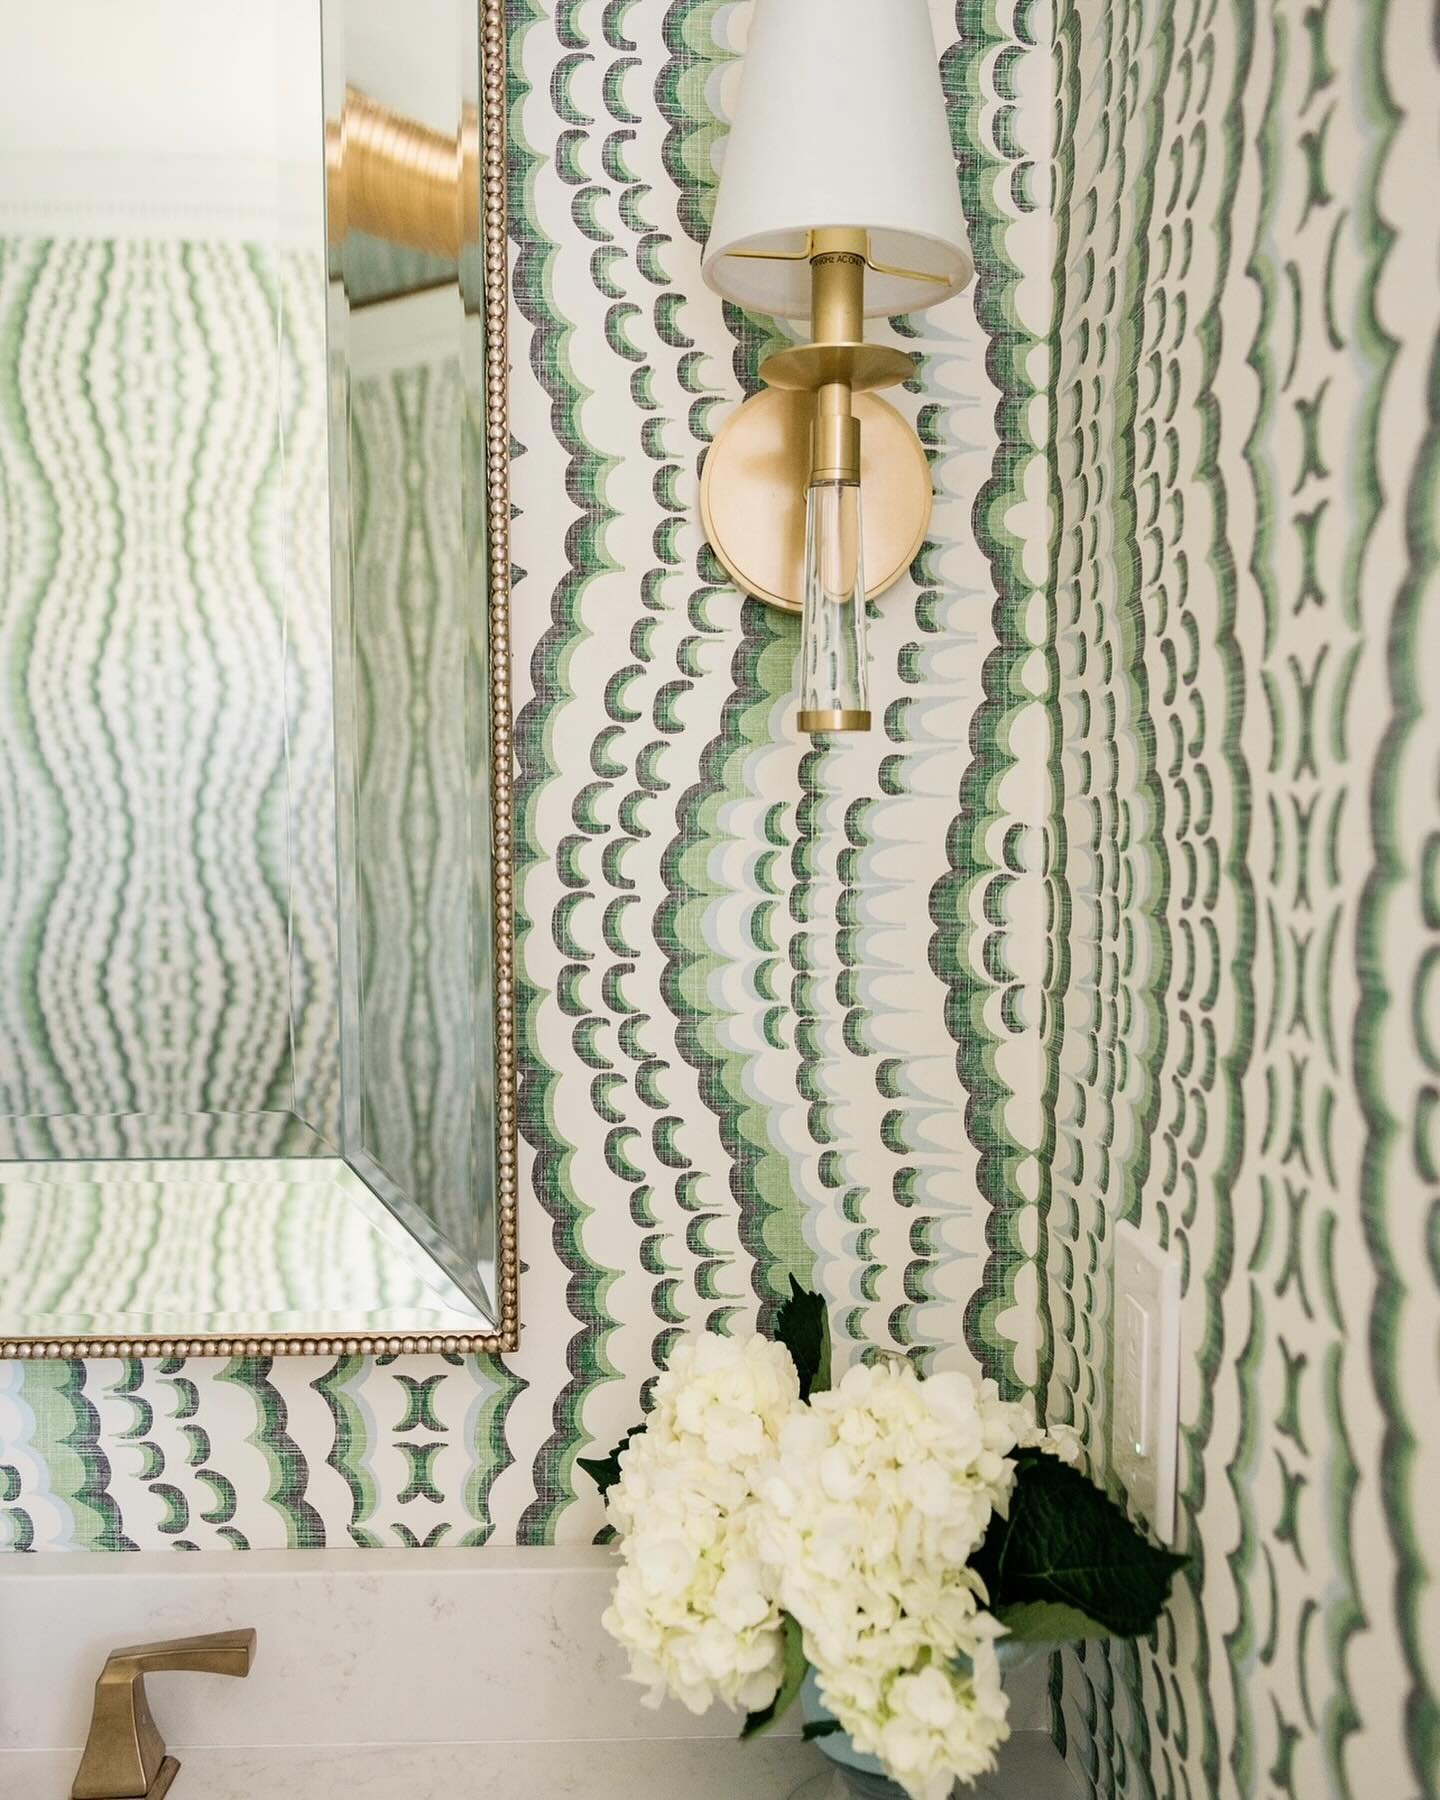 Embracing the Luck of the Irish with a splash of green in this newly renovated guest bathroom.  Photography: @mariawestphotography  #cullerproject#greenwithenvy#happysaintpatricksday#guestbathroomdesign#interiordesign#highpointdesigner#guestbathroomi